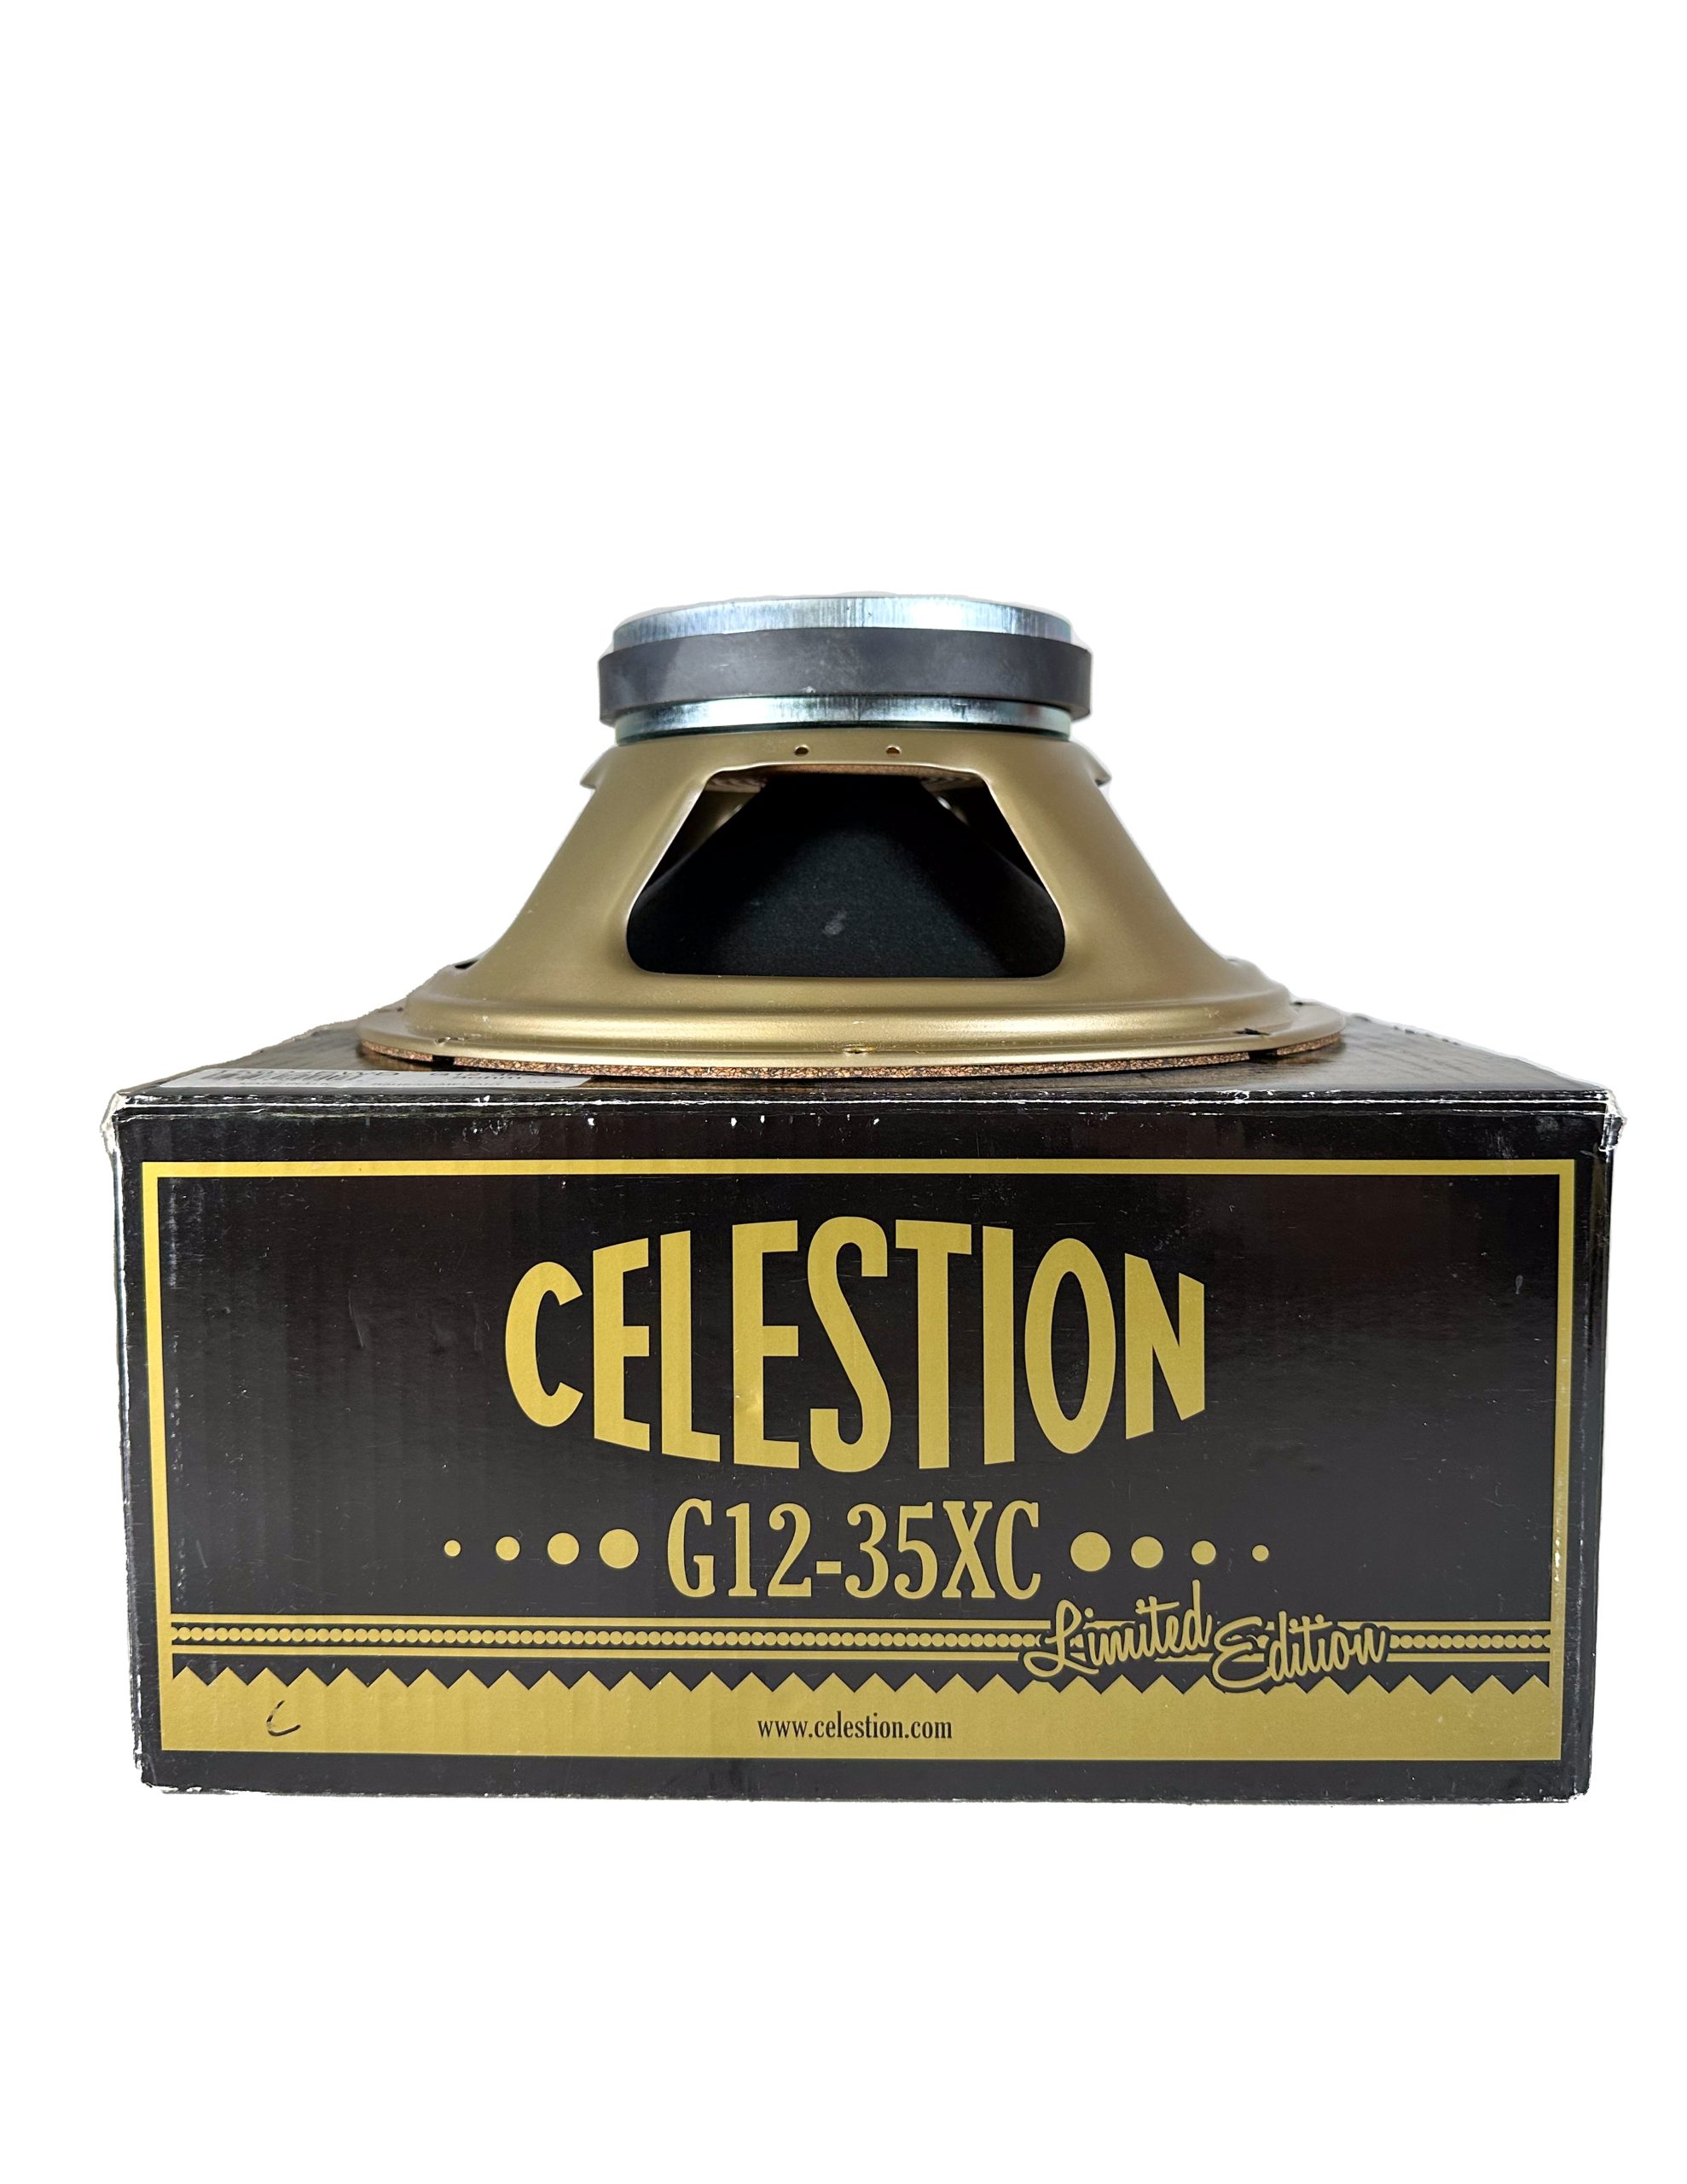 Celestion Limited Edition G12-35XC T5929 12